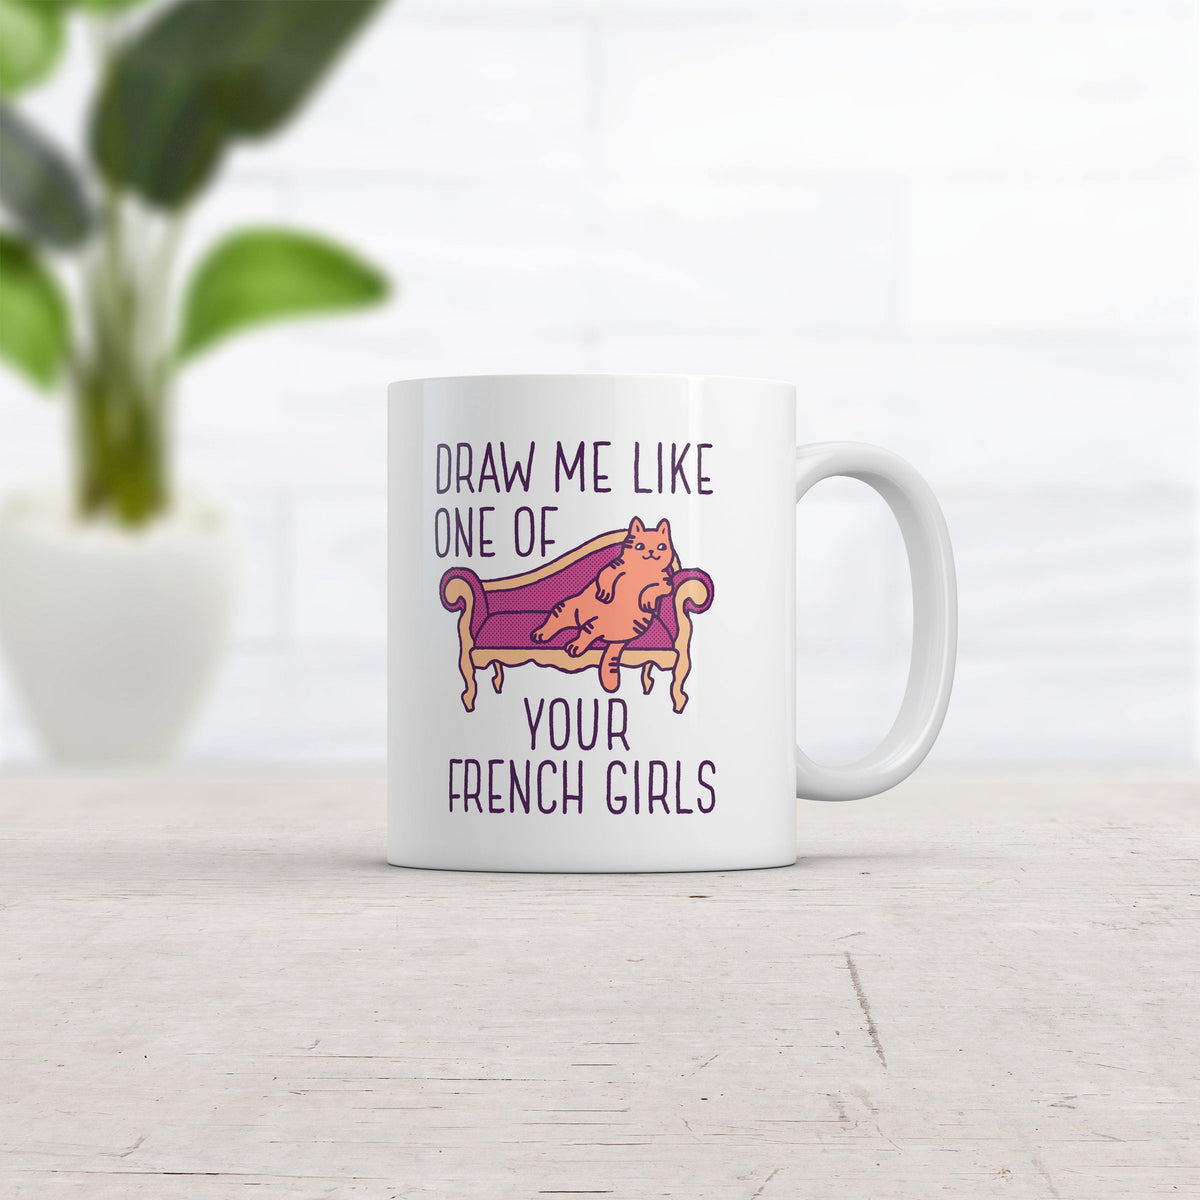 Draw Me Like One Of Your French Girls Mug Funny Kitty Cat Joke Graphic Novelty Coffee Cup-11oz  -  Crazy Dog T-Shirts